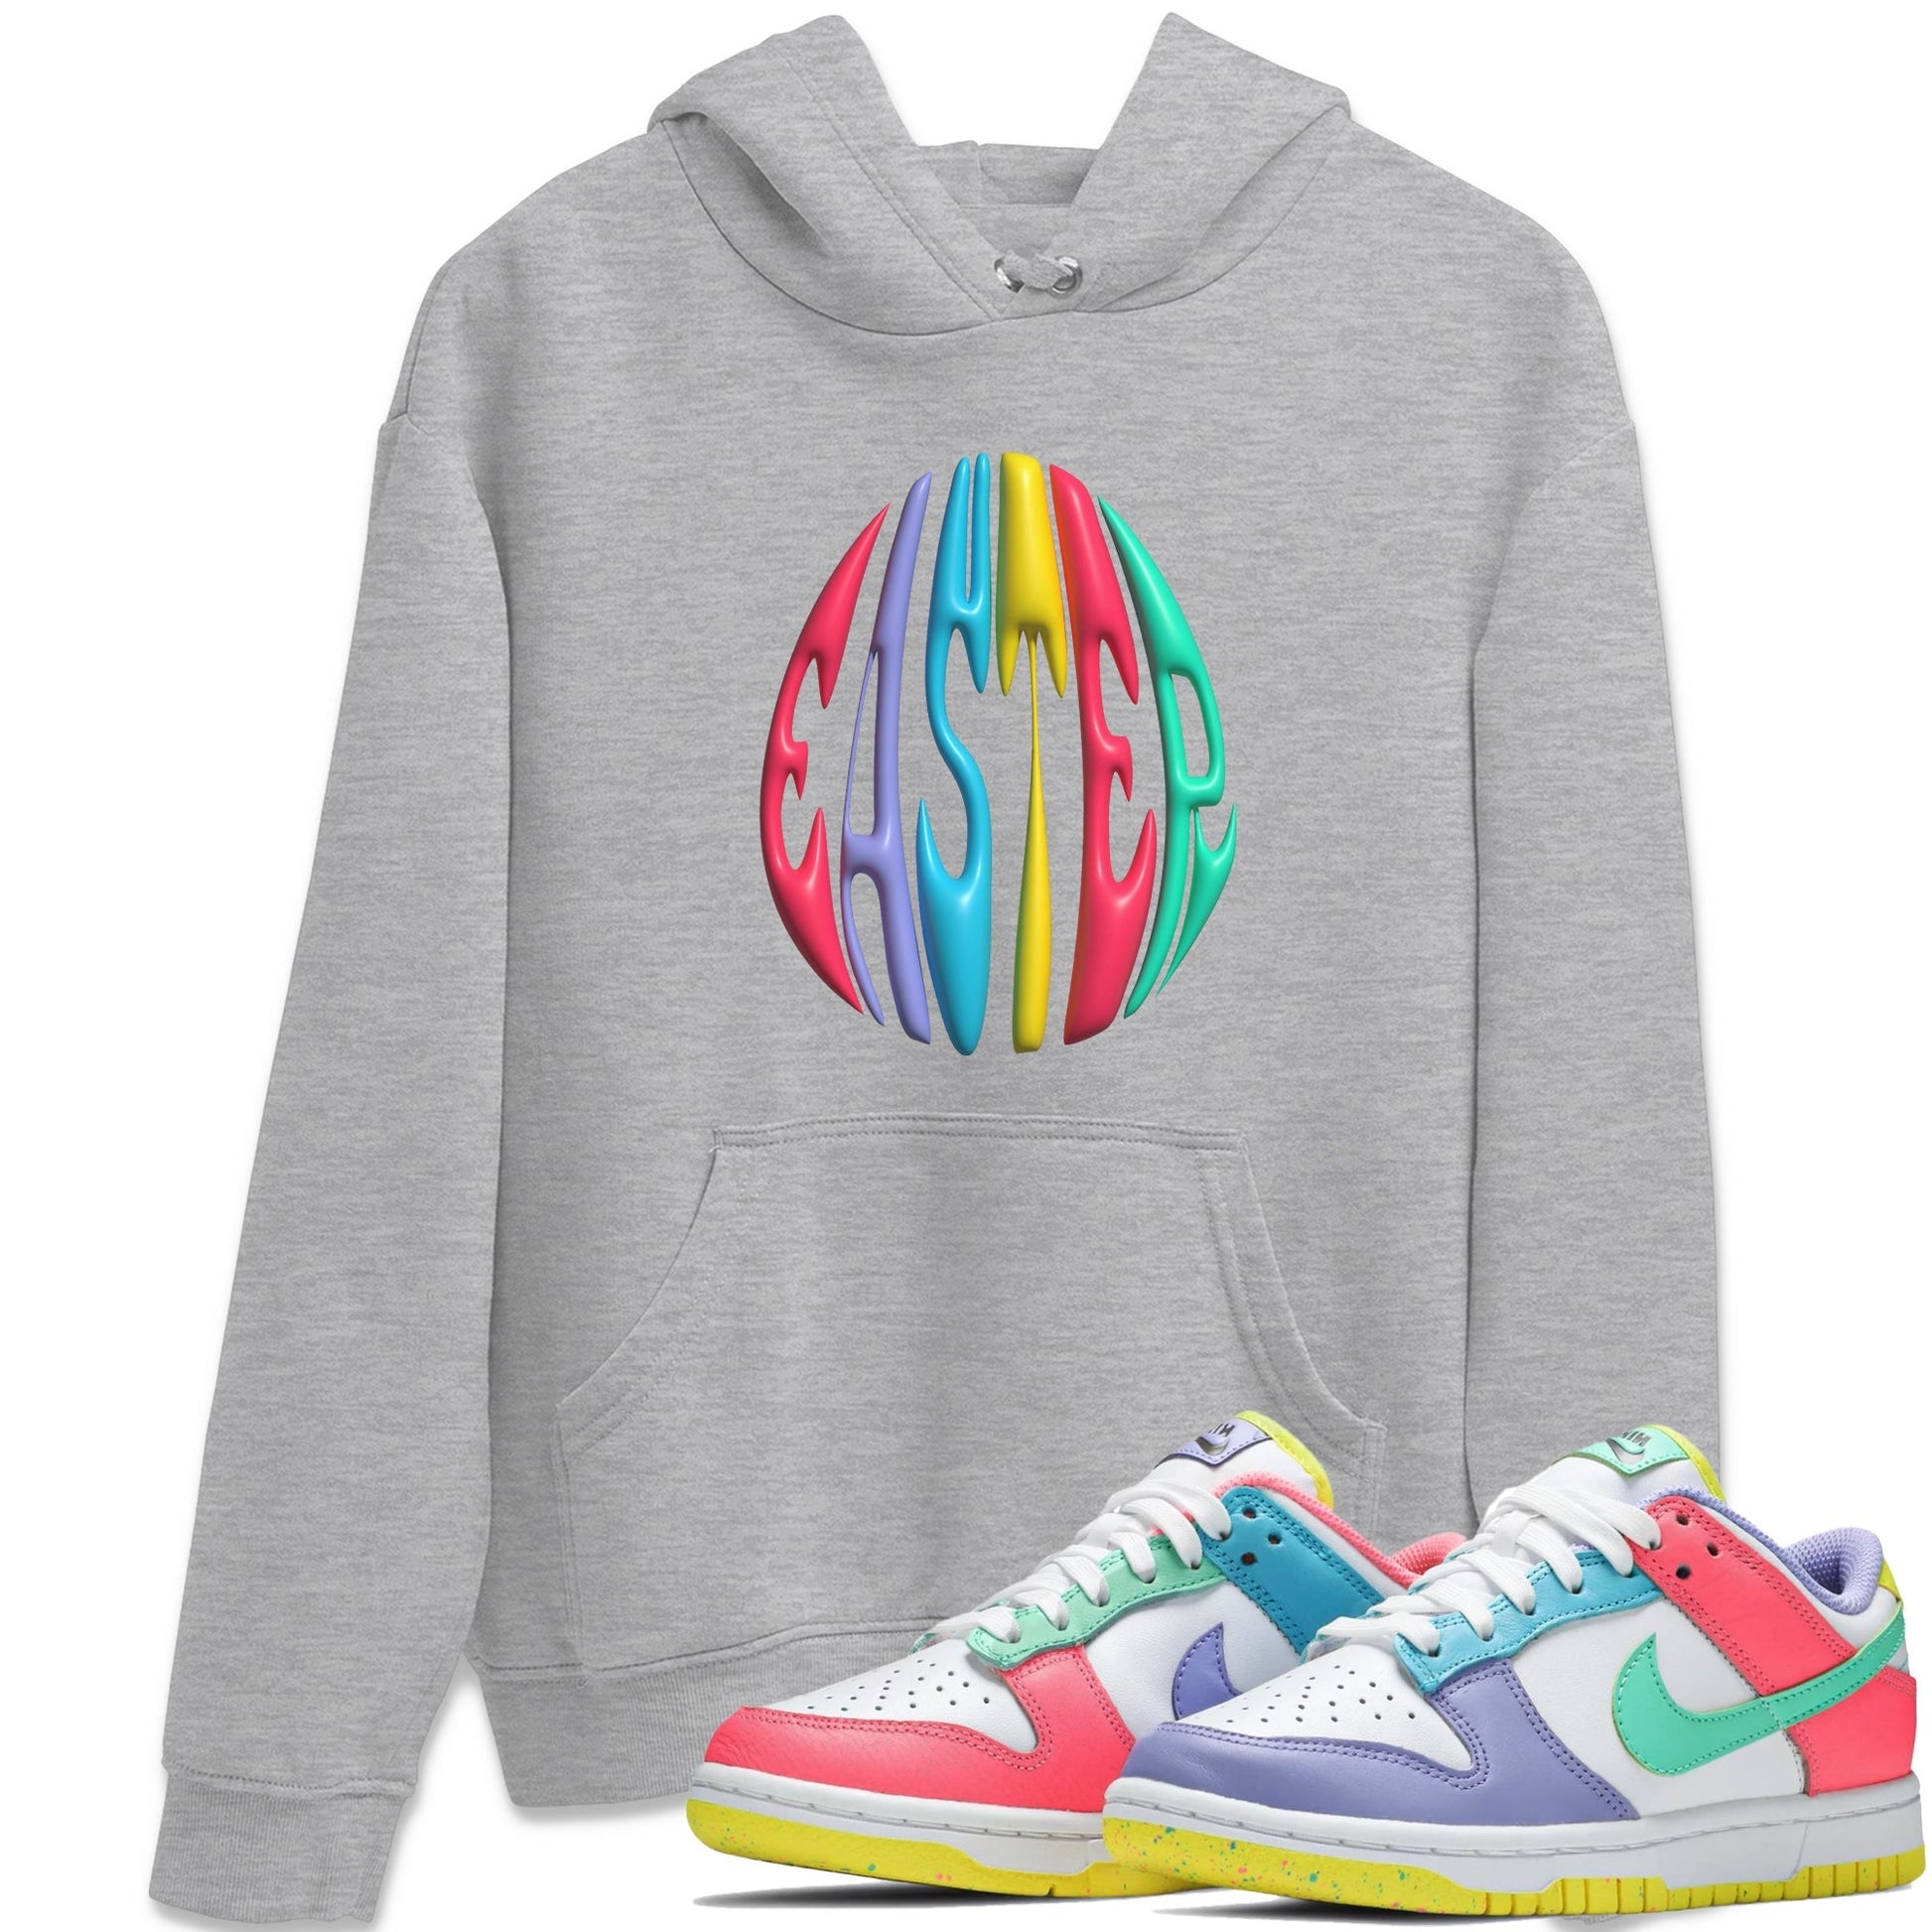 Dunk Easter Candy Sneaker Tees Drip Gear Zone 3D Easter Typo Sneaker Tees Nike Easter Shirt Unisex Shirts Heather Grey 1